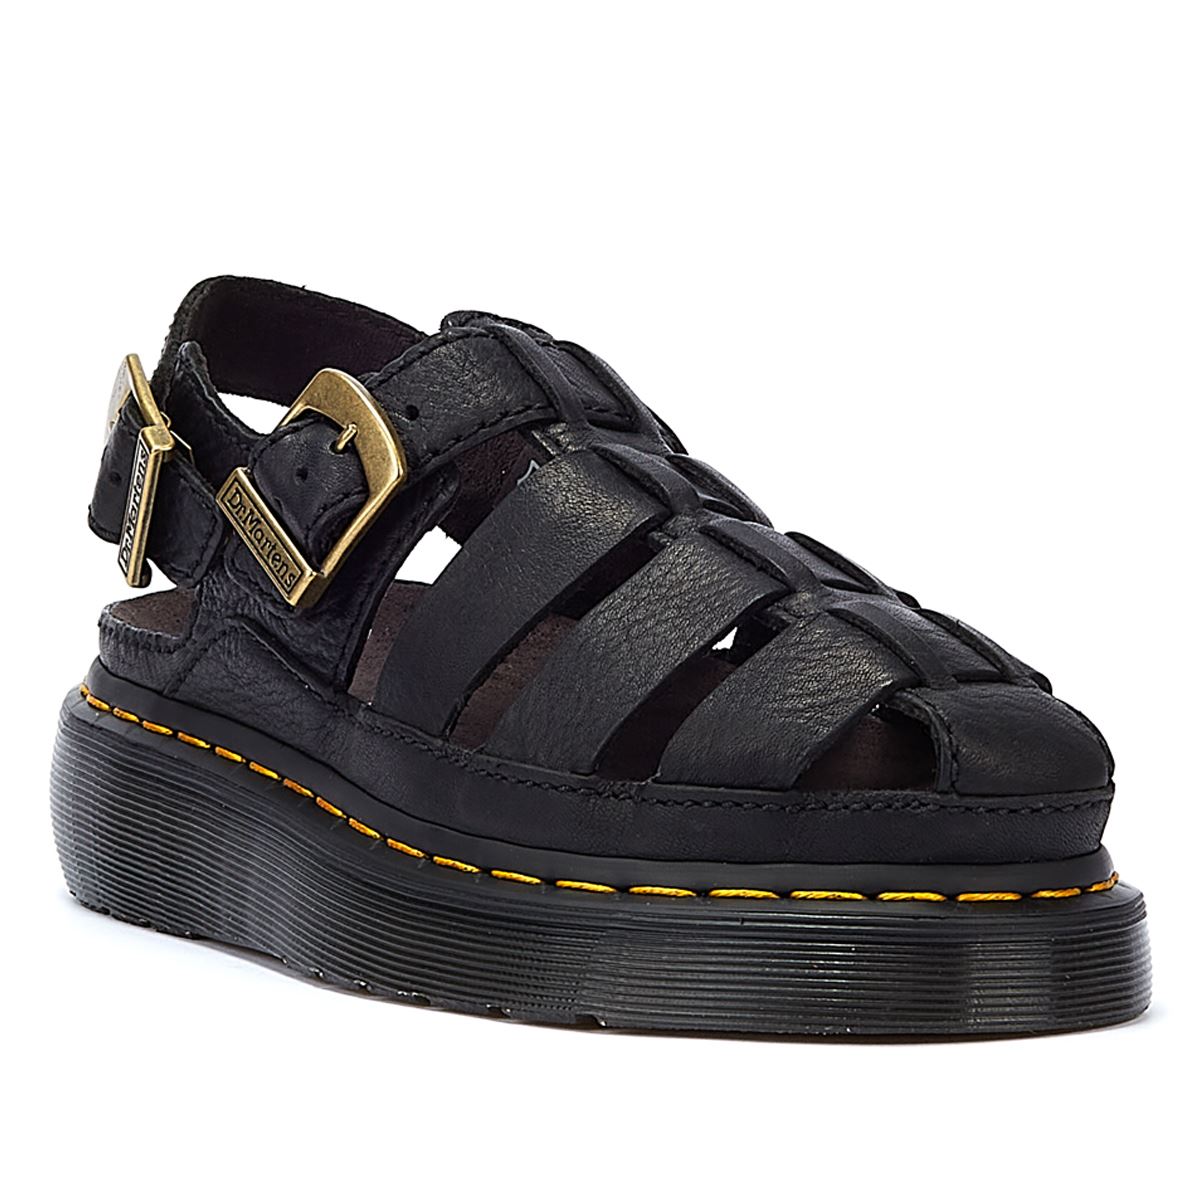 Dr. Martens Fisherman Grizzly Women’s Black Sandals - Boot And Bag UK